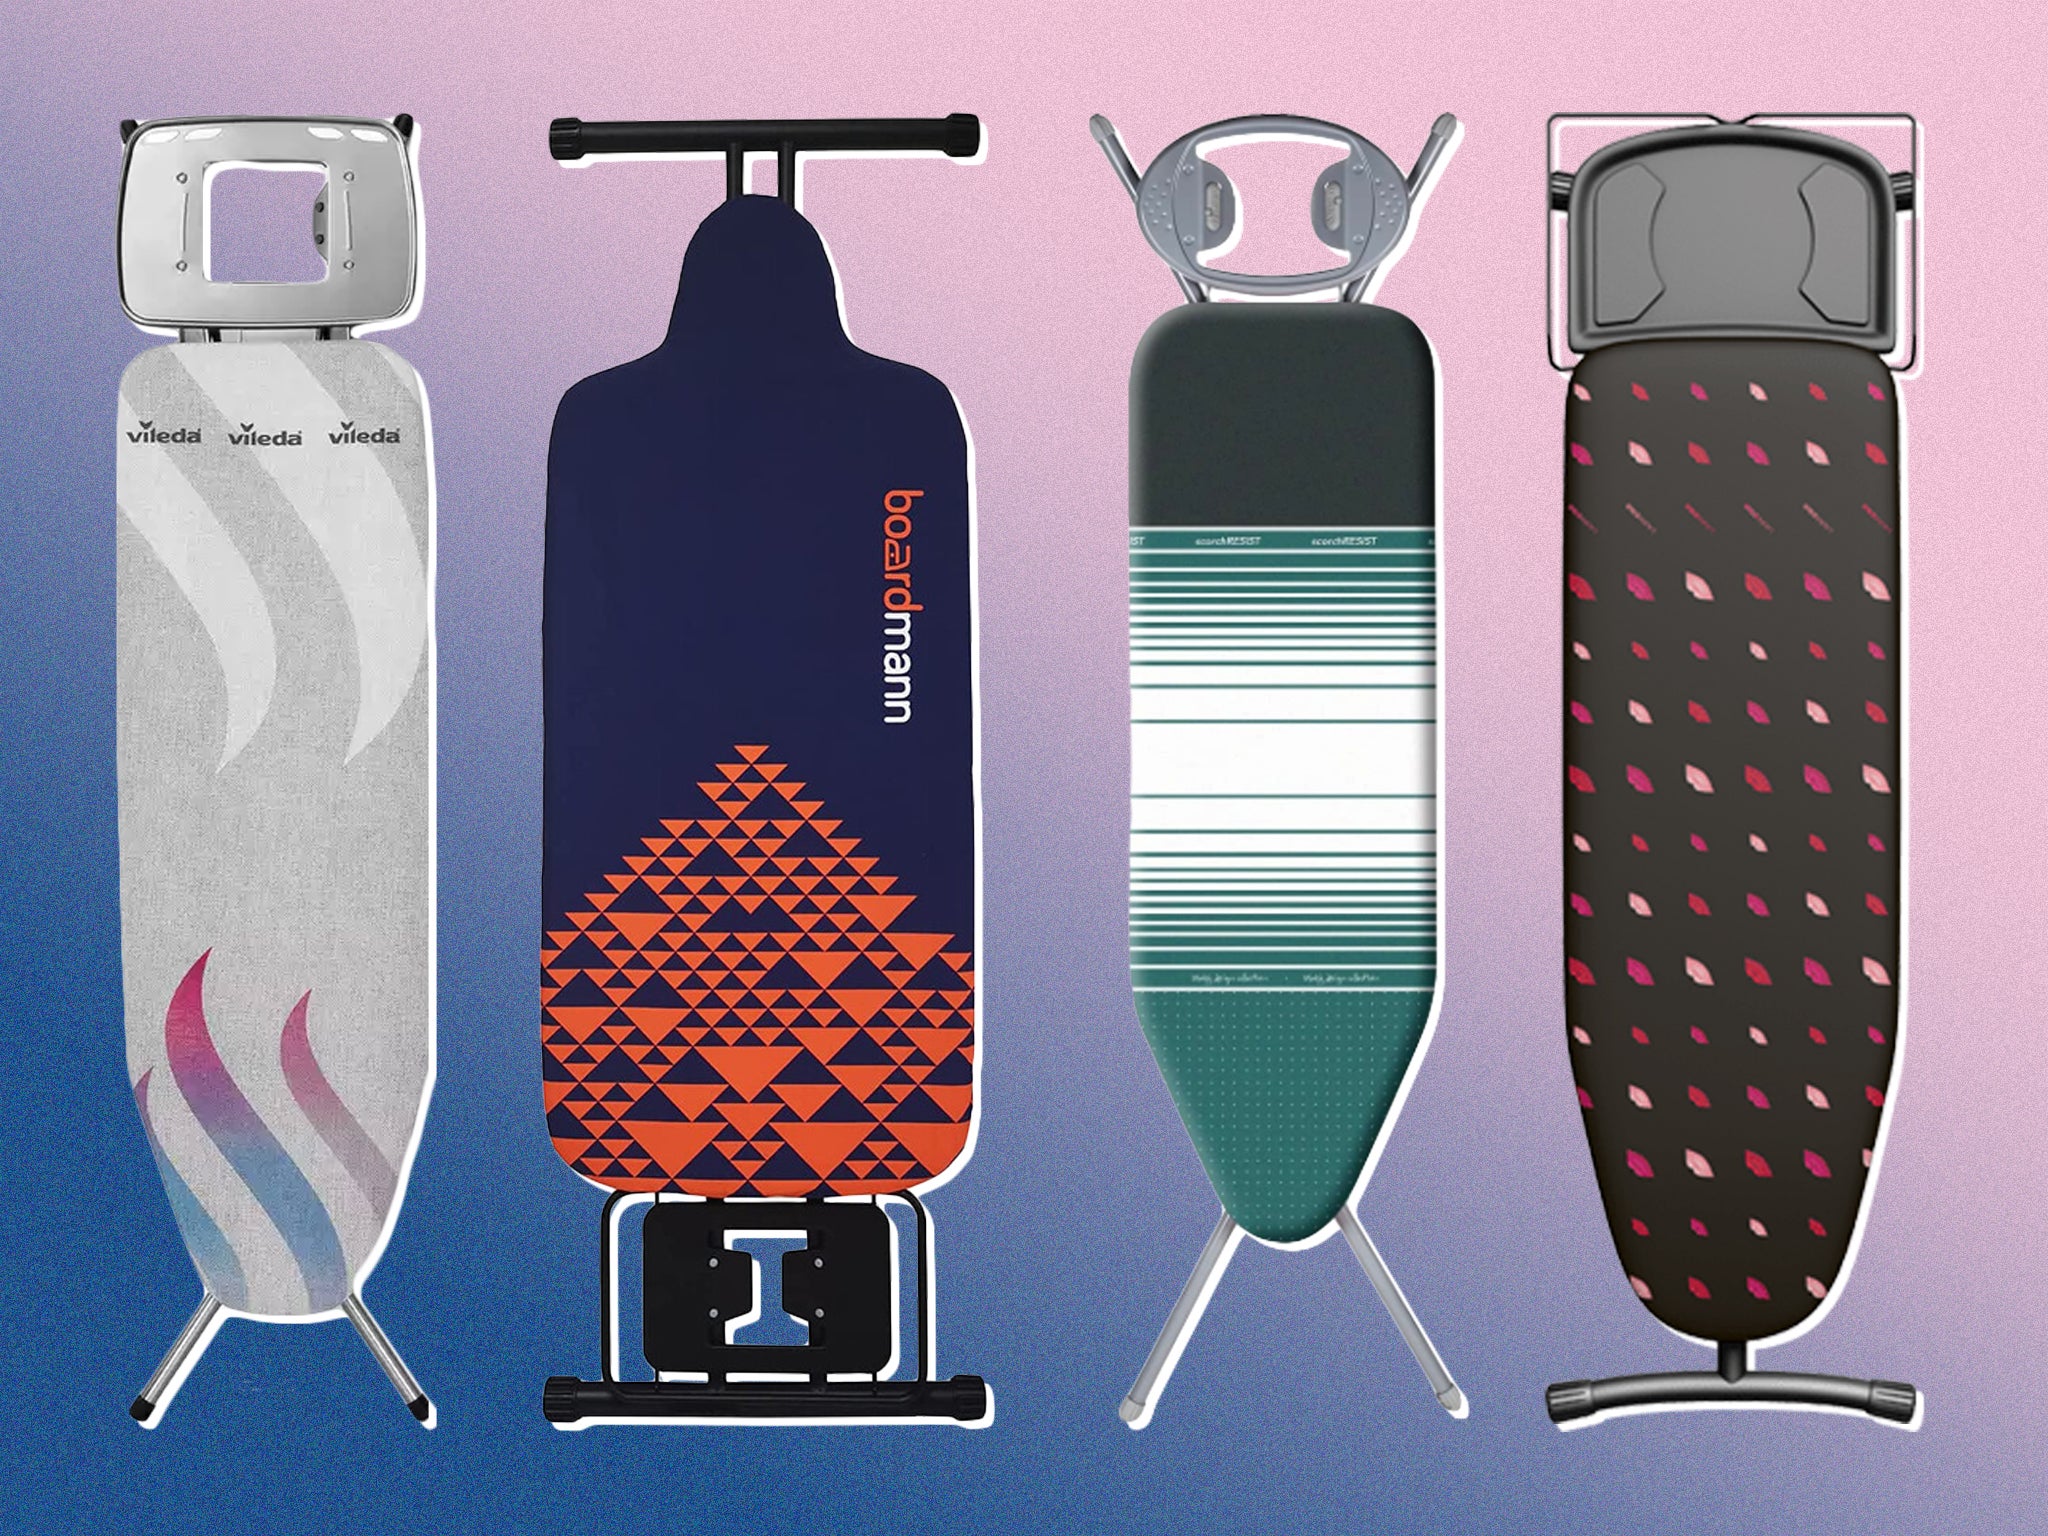 We tested each ironing board on sheets, shirts and delicate items